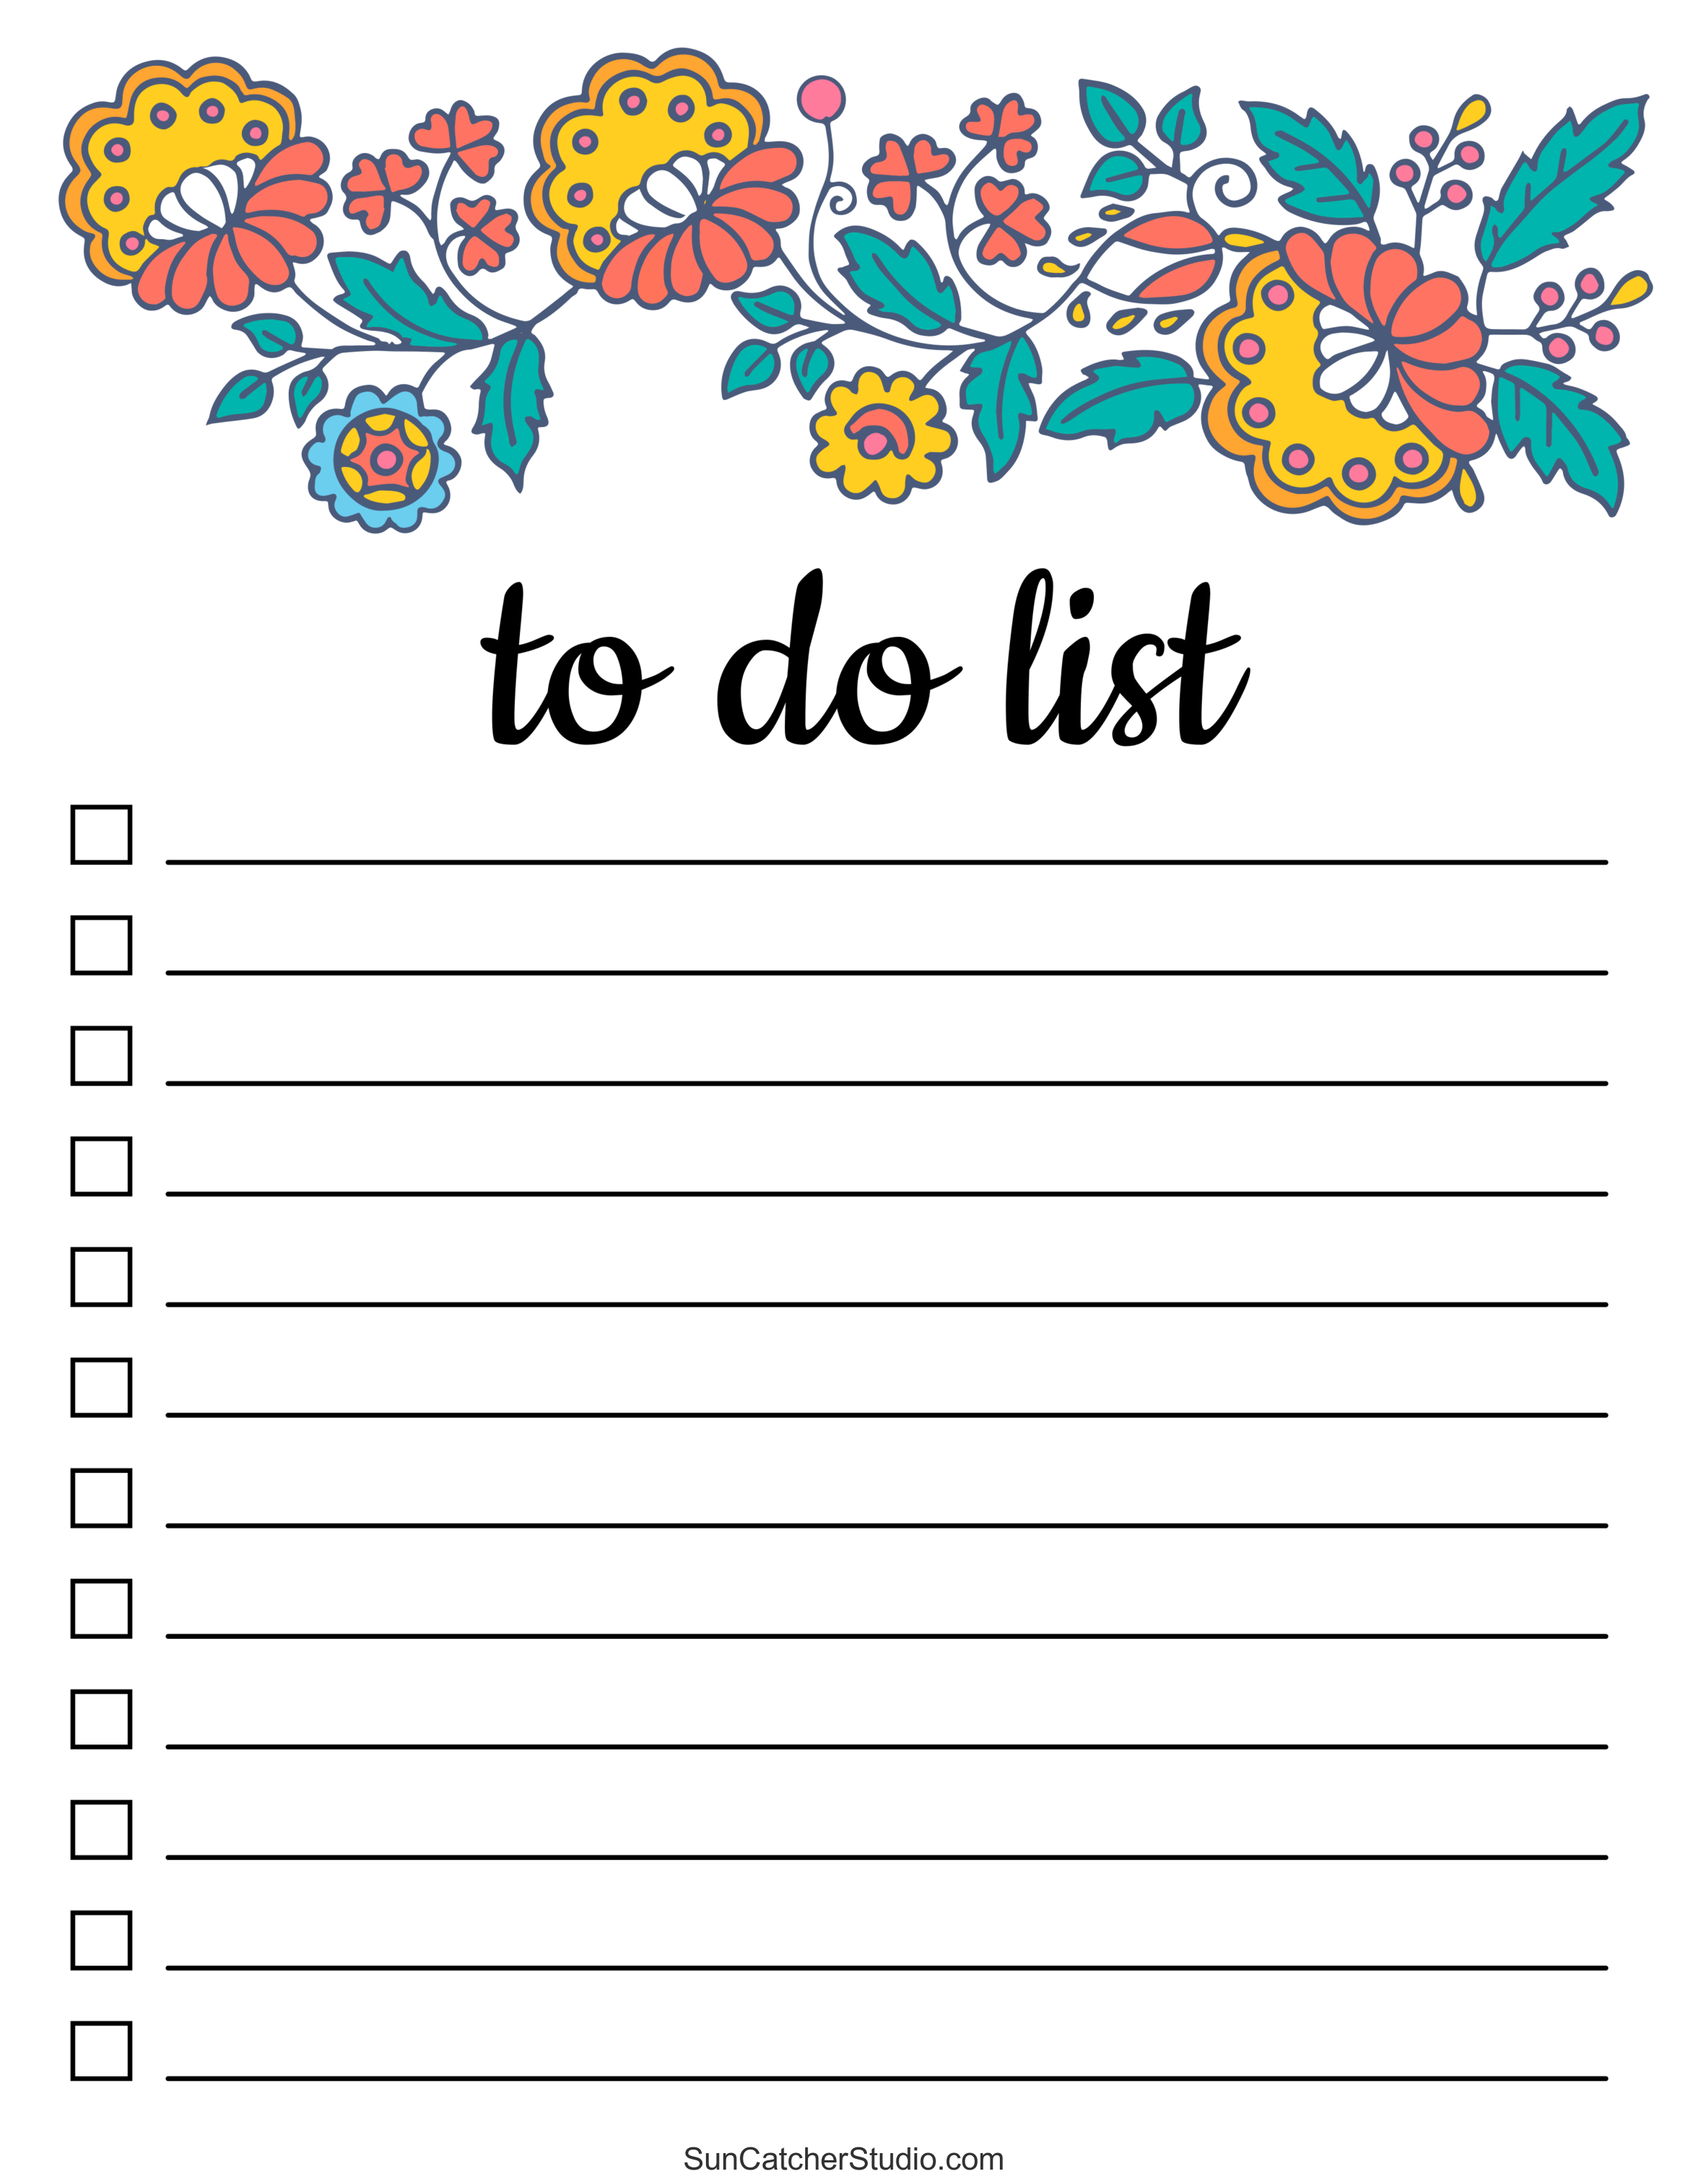 Cute Printable To Do Lists Get Organized And Add A Touch Of Adorable